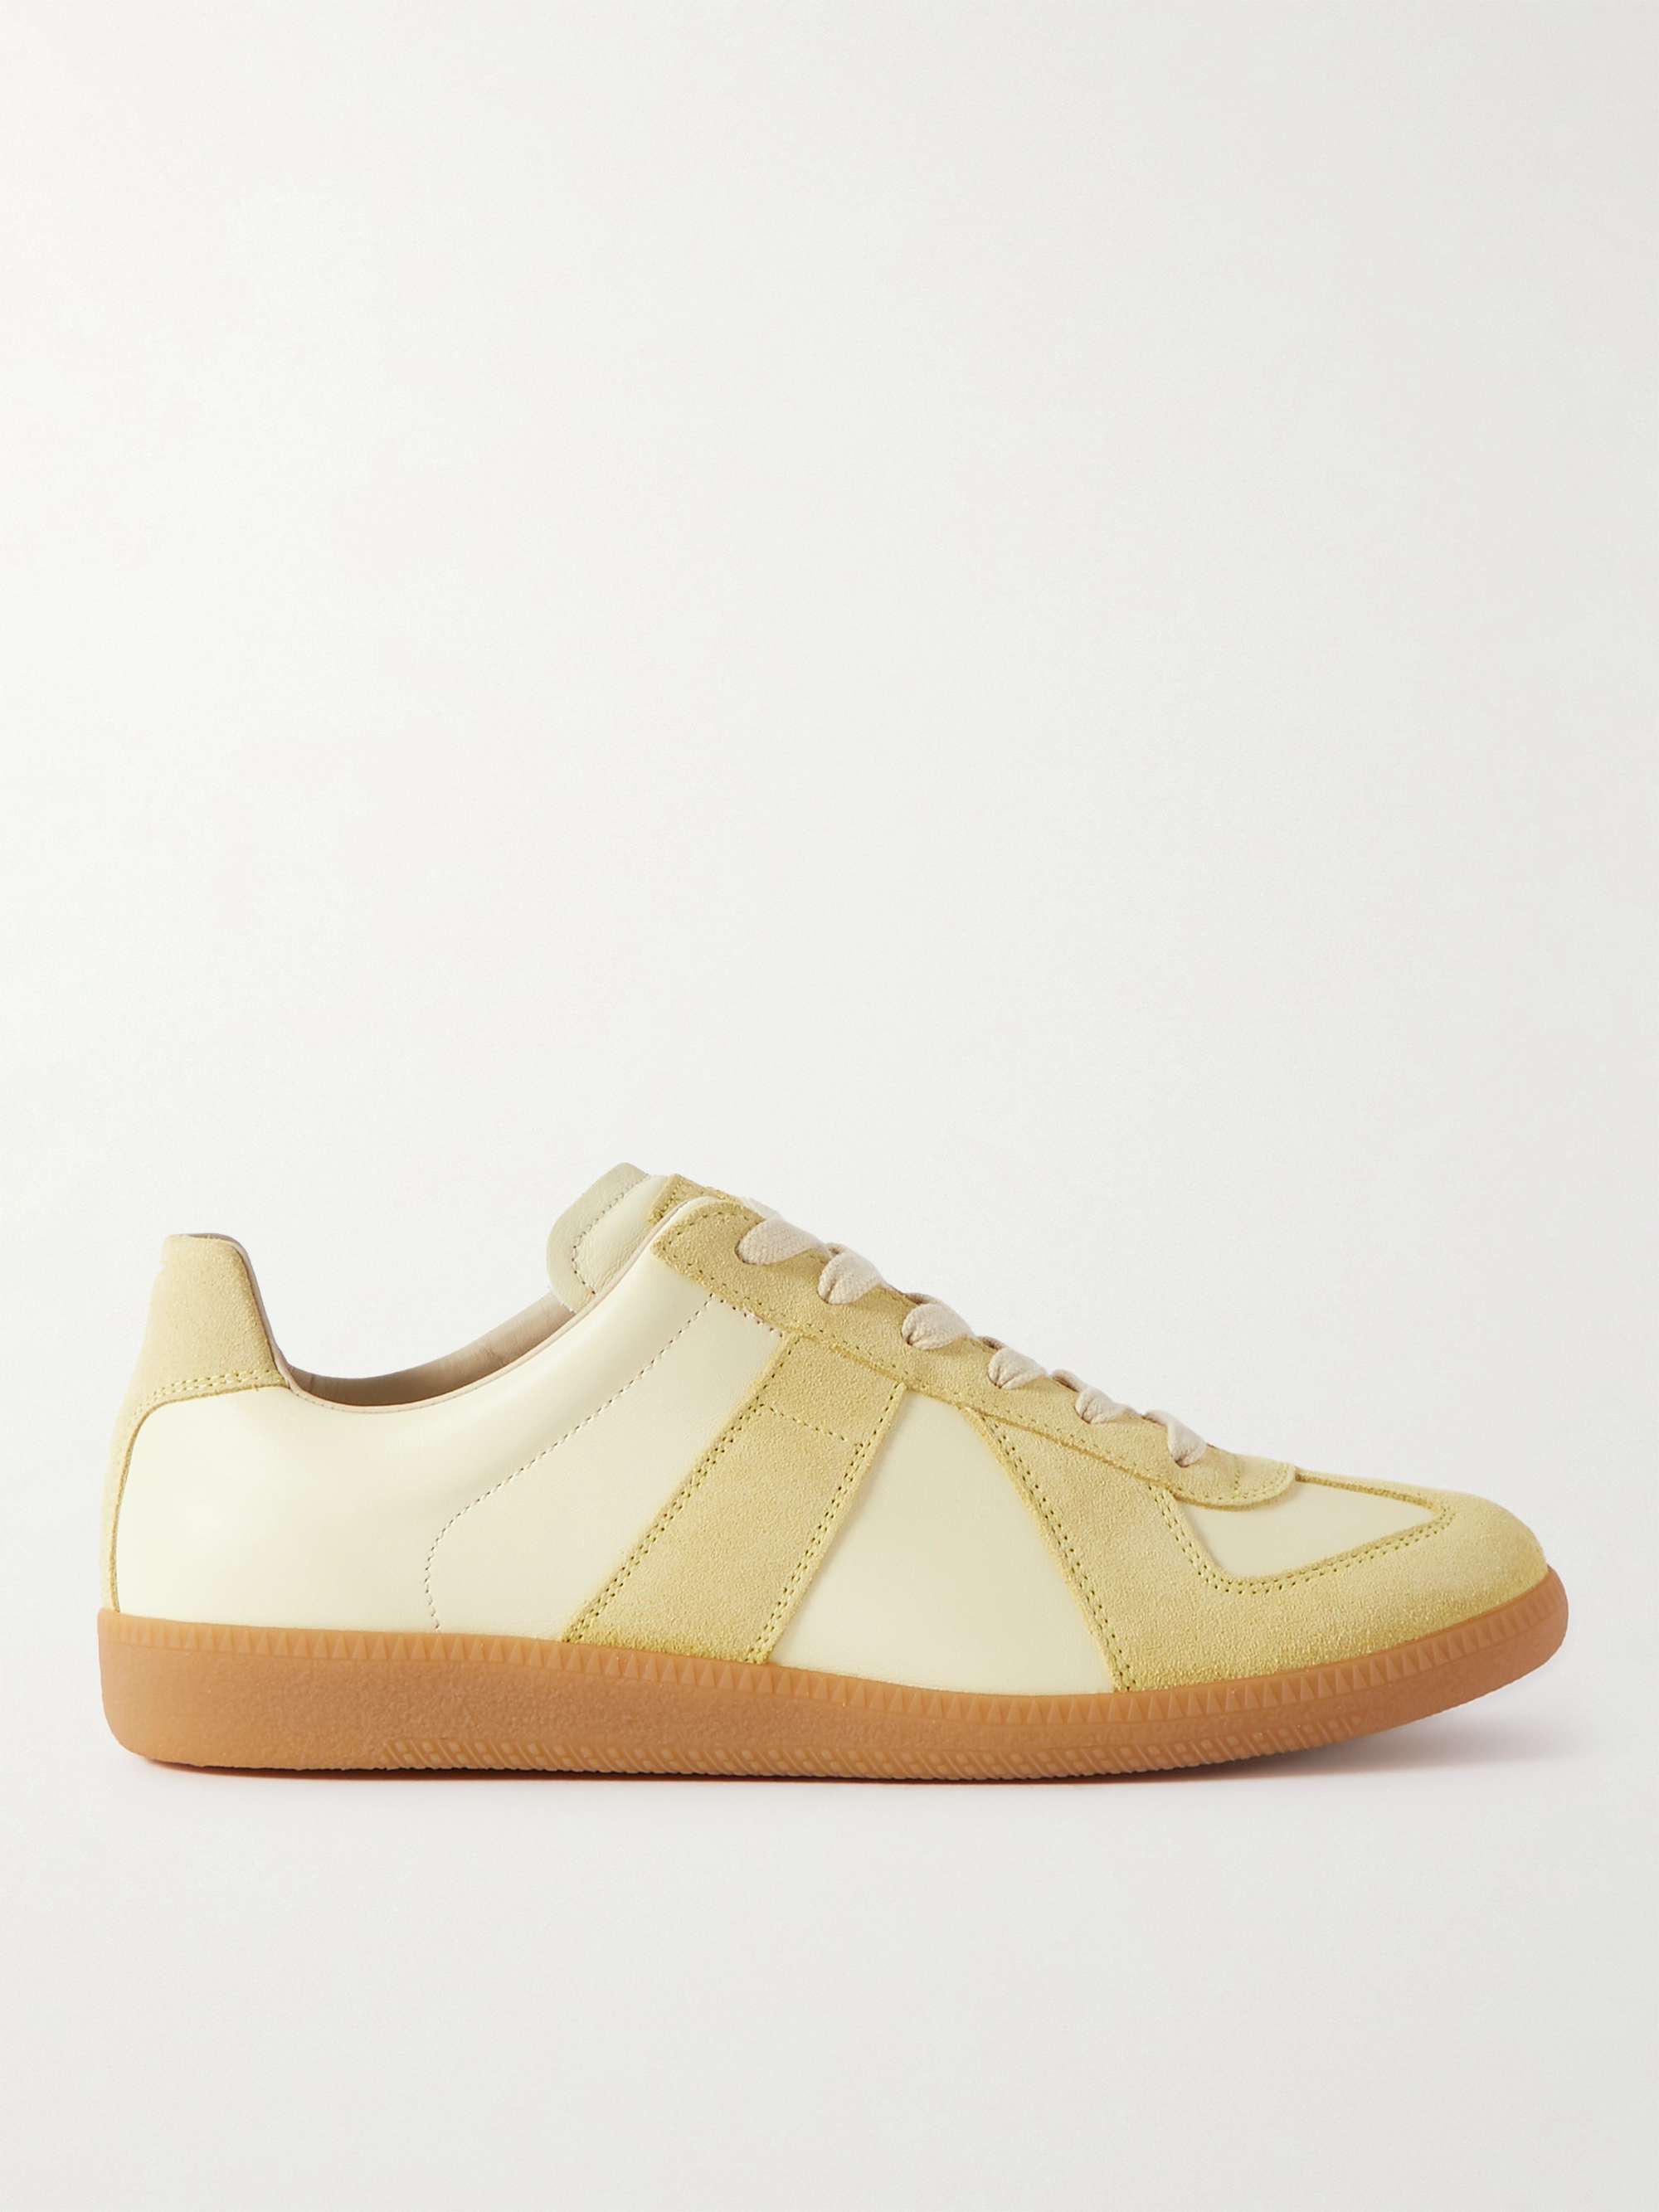 strubehoved Scan renovere MAISON MARGIELA Replica Leather and Suede Sneakers for Men | MR PORTER